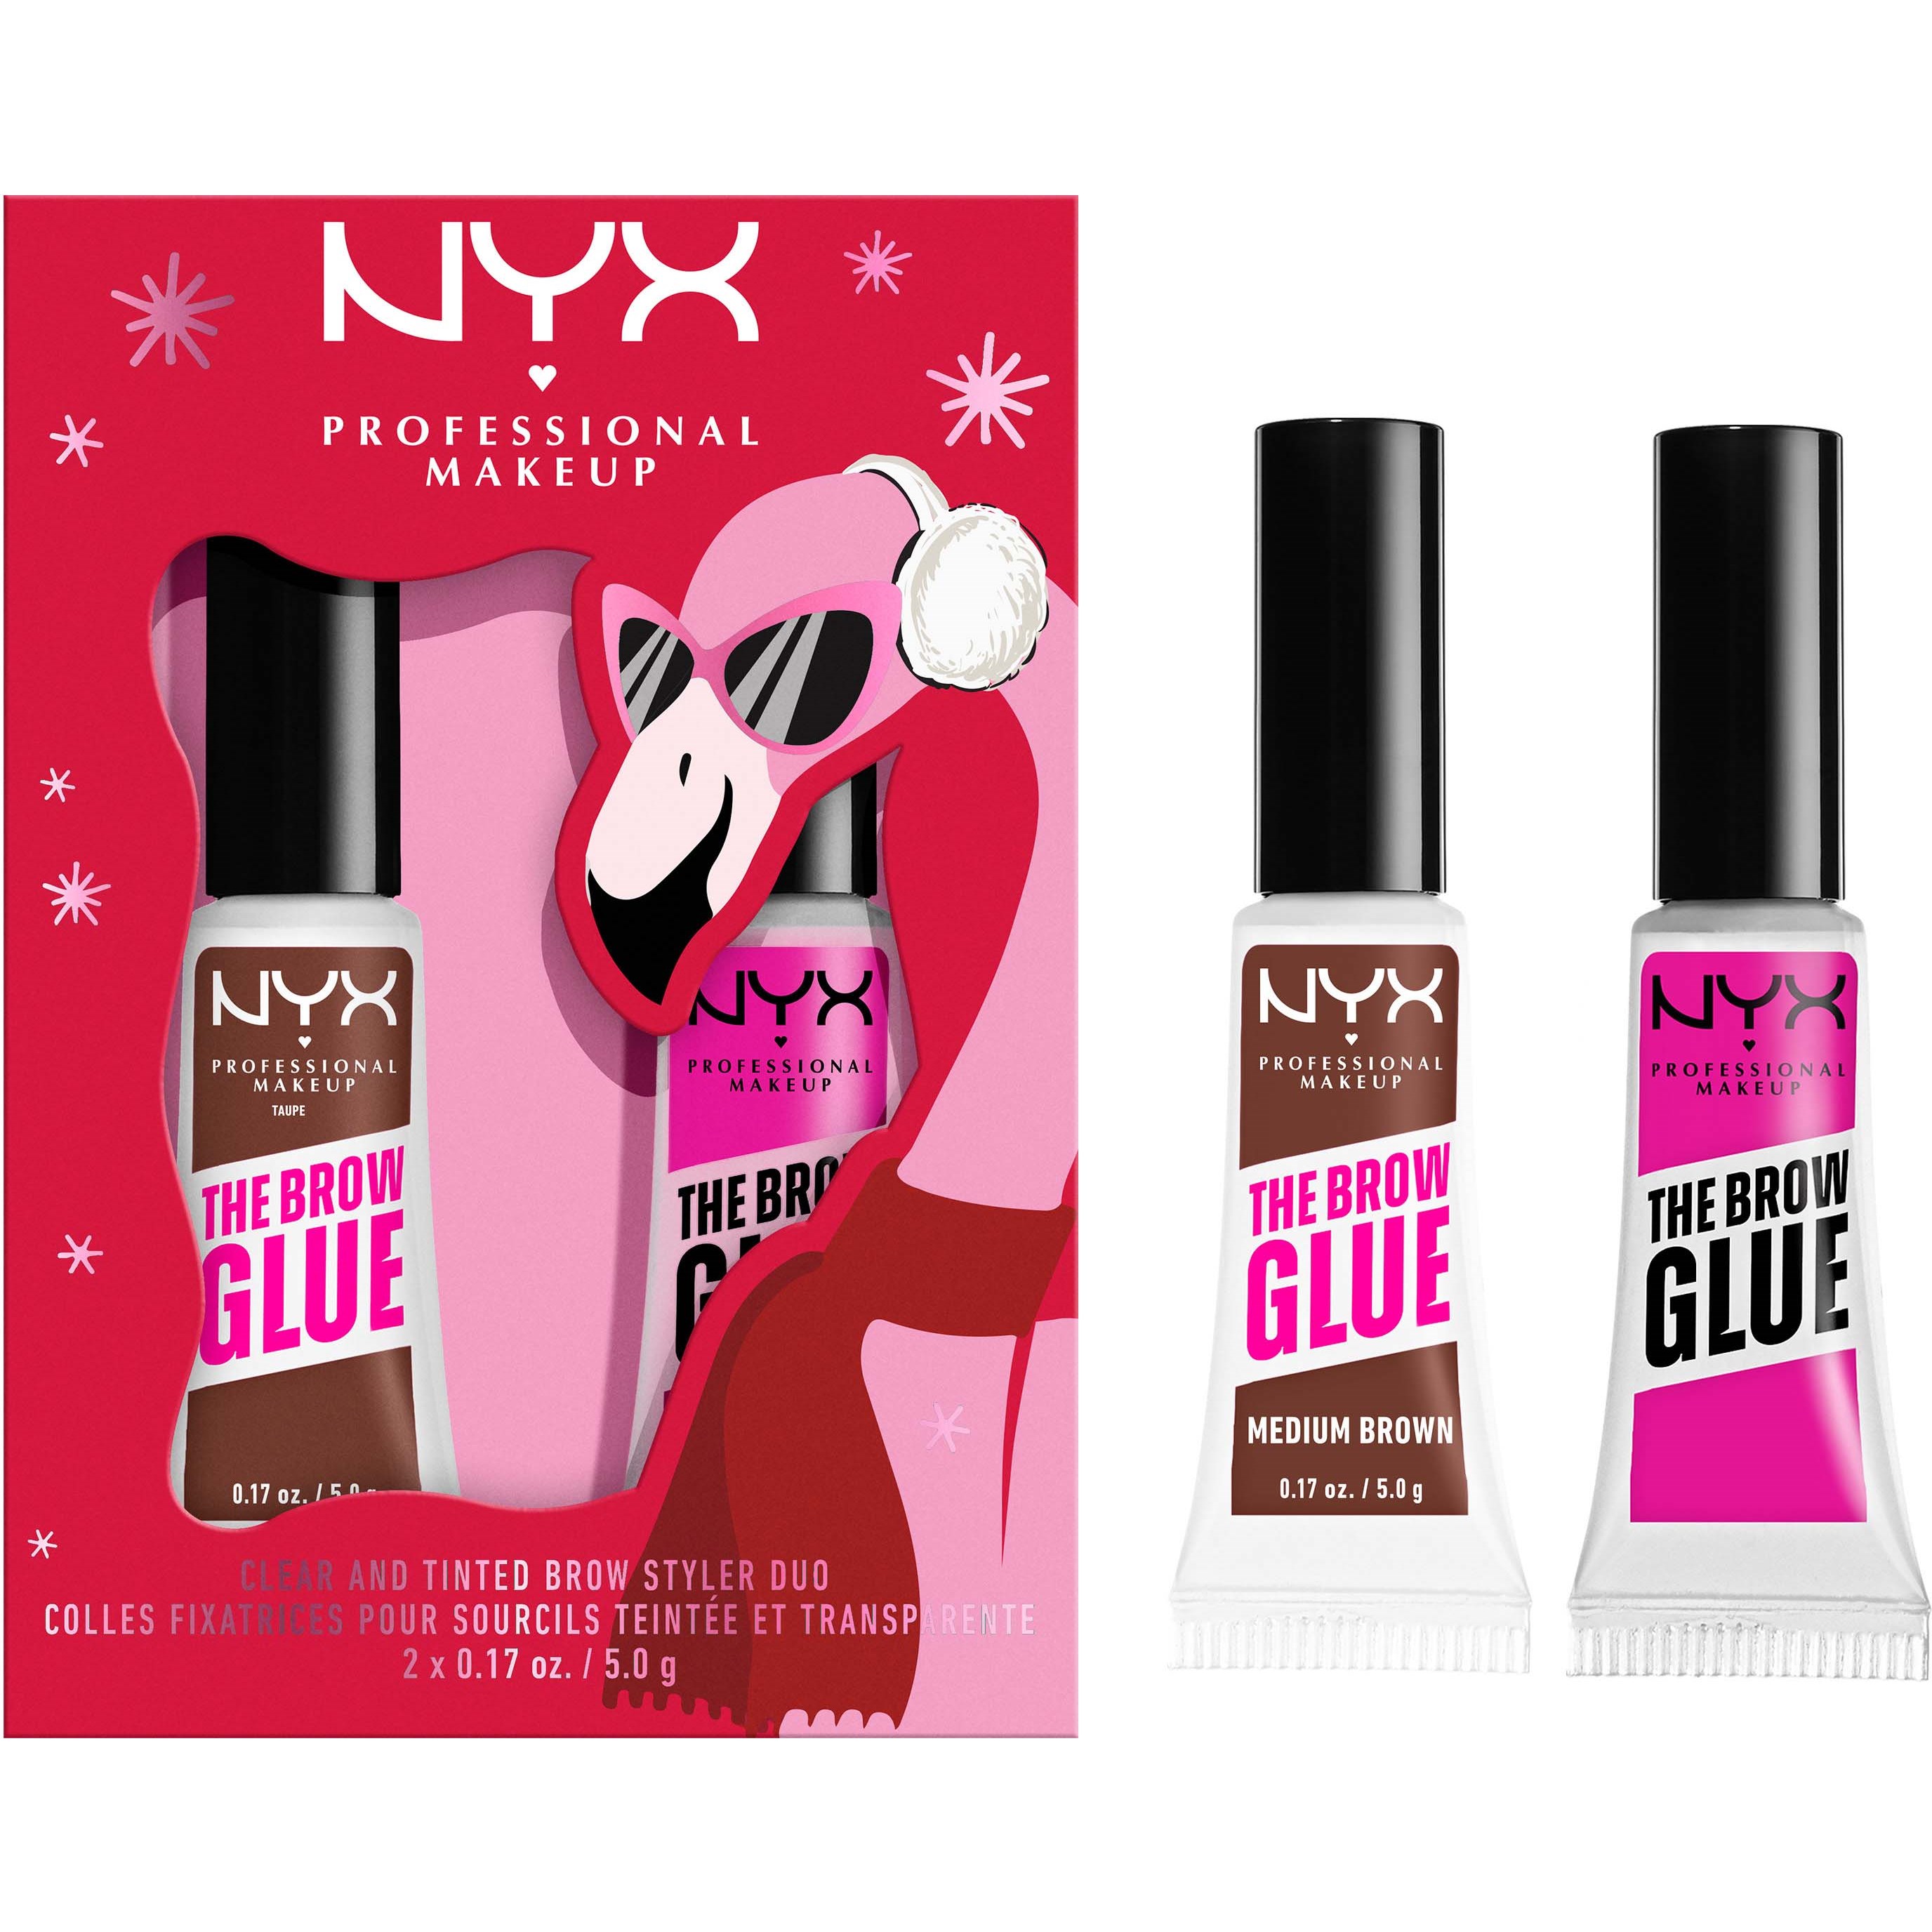 NYX PROFESSIONAL MAKEUP The Brow Glue Duo Gift Box